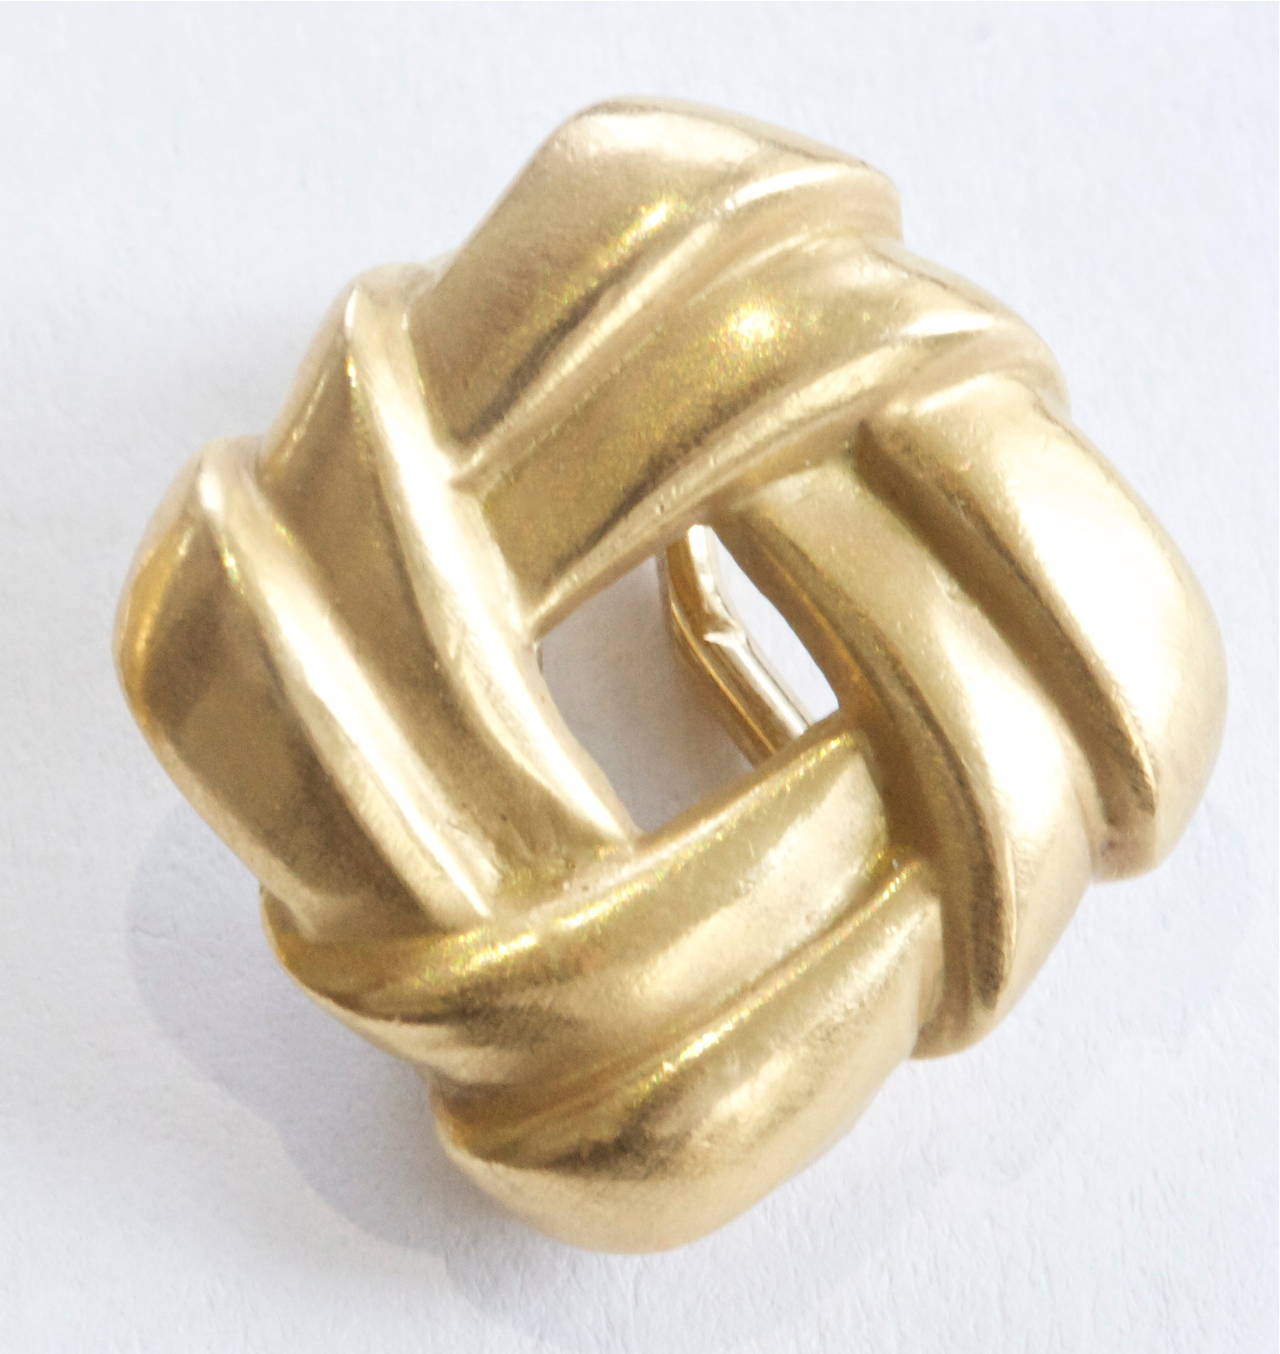 A set of sweeping waves that seamlessly never ends has been created out of 18k yellow gold by the jewelry designer Angela Cumming.  Dated 1988 and signed Cummings.

Weighs 11.1 grams

Dimensions are 1/2